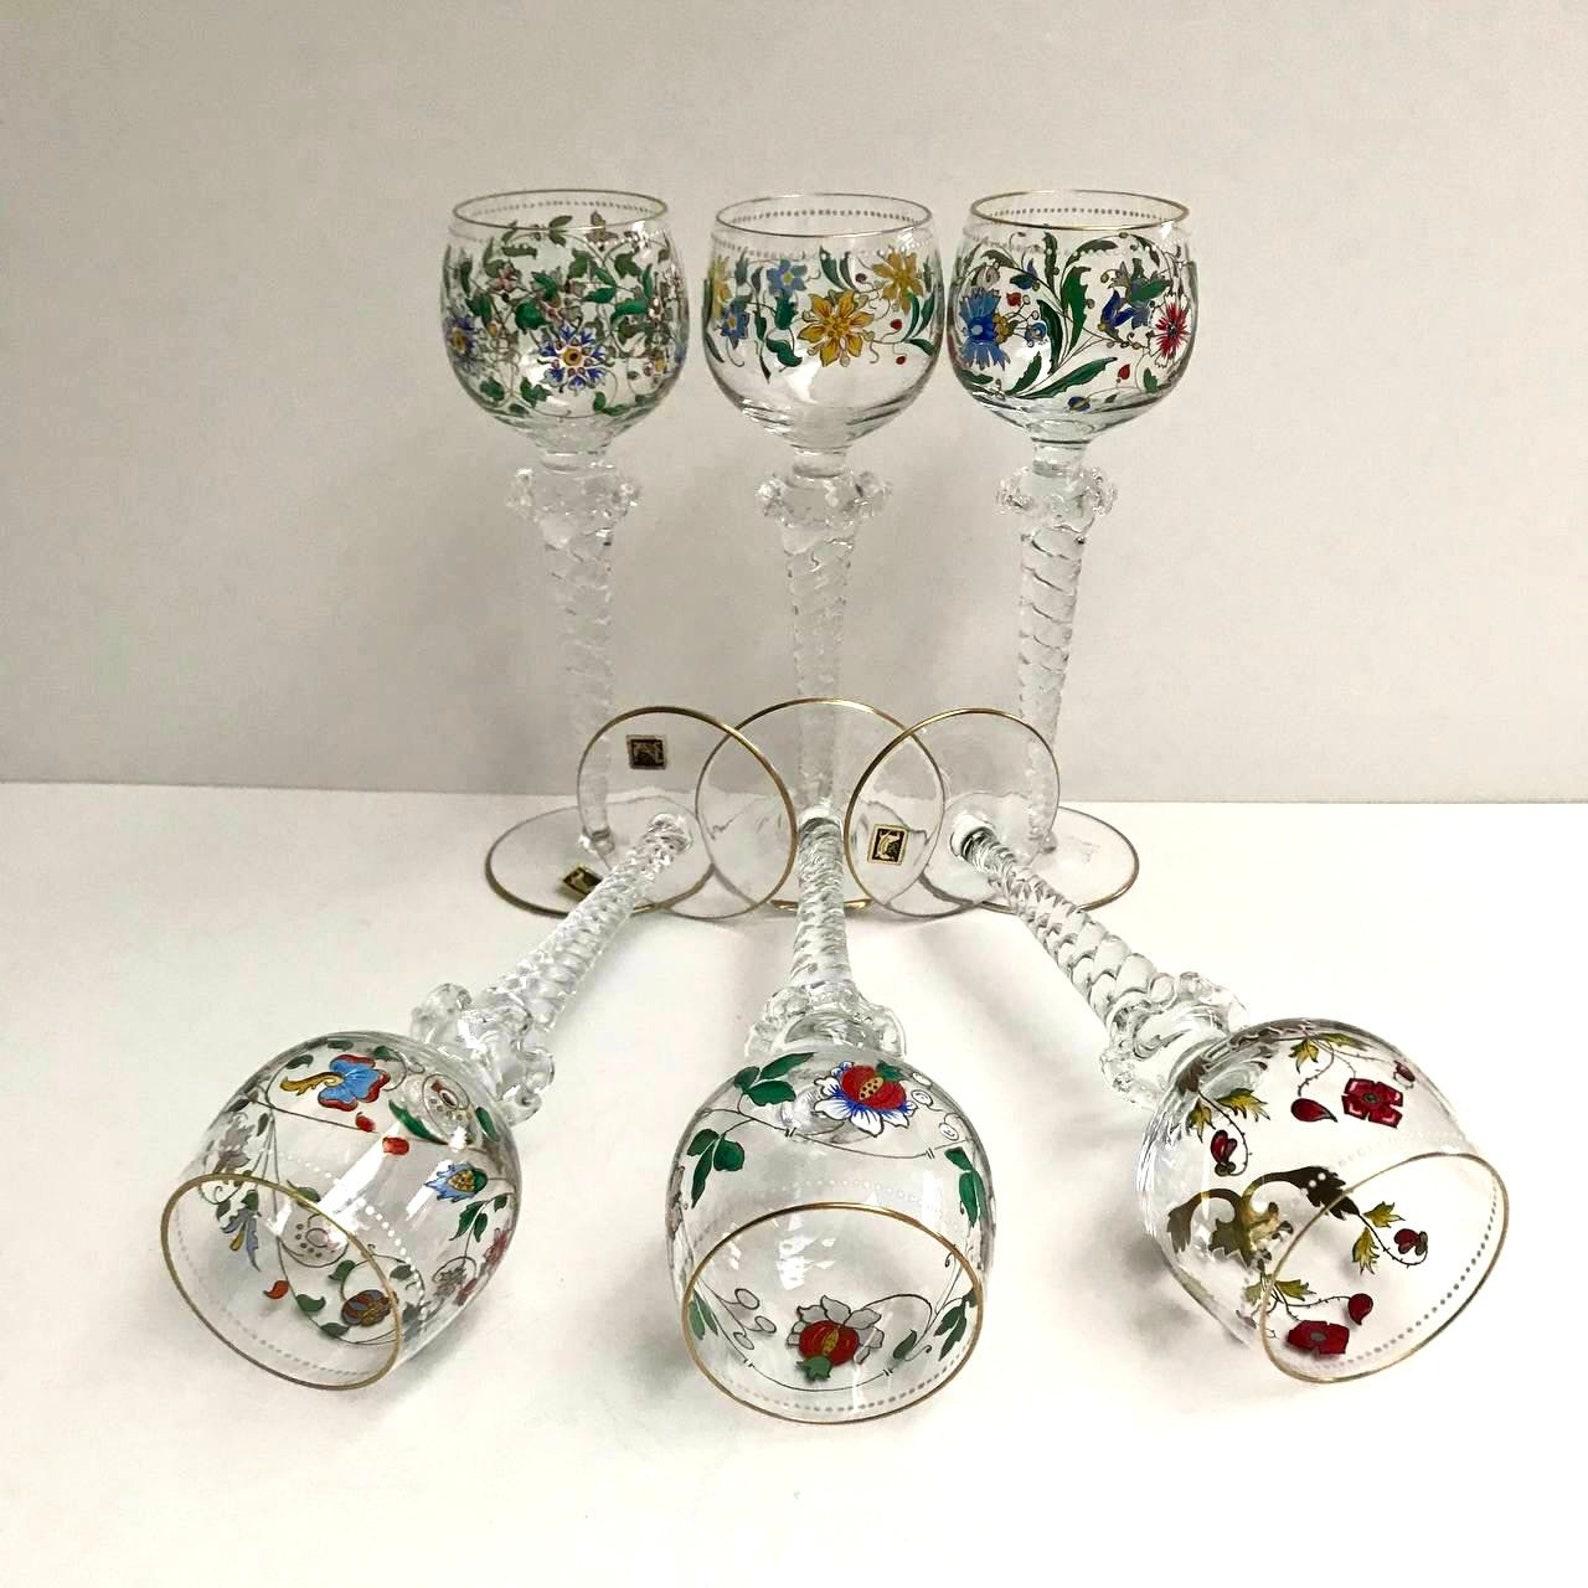 Elite crystal glasses, decorated with flowers. A set of glasses  of 6 pieces by Gluskunst Hirtreiter. 

 The patterns on the crystal glasses are cut by hand.. This makes them even more majestic and give a special chic.

  This item will serve as a